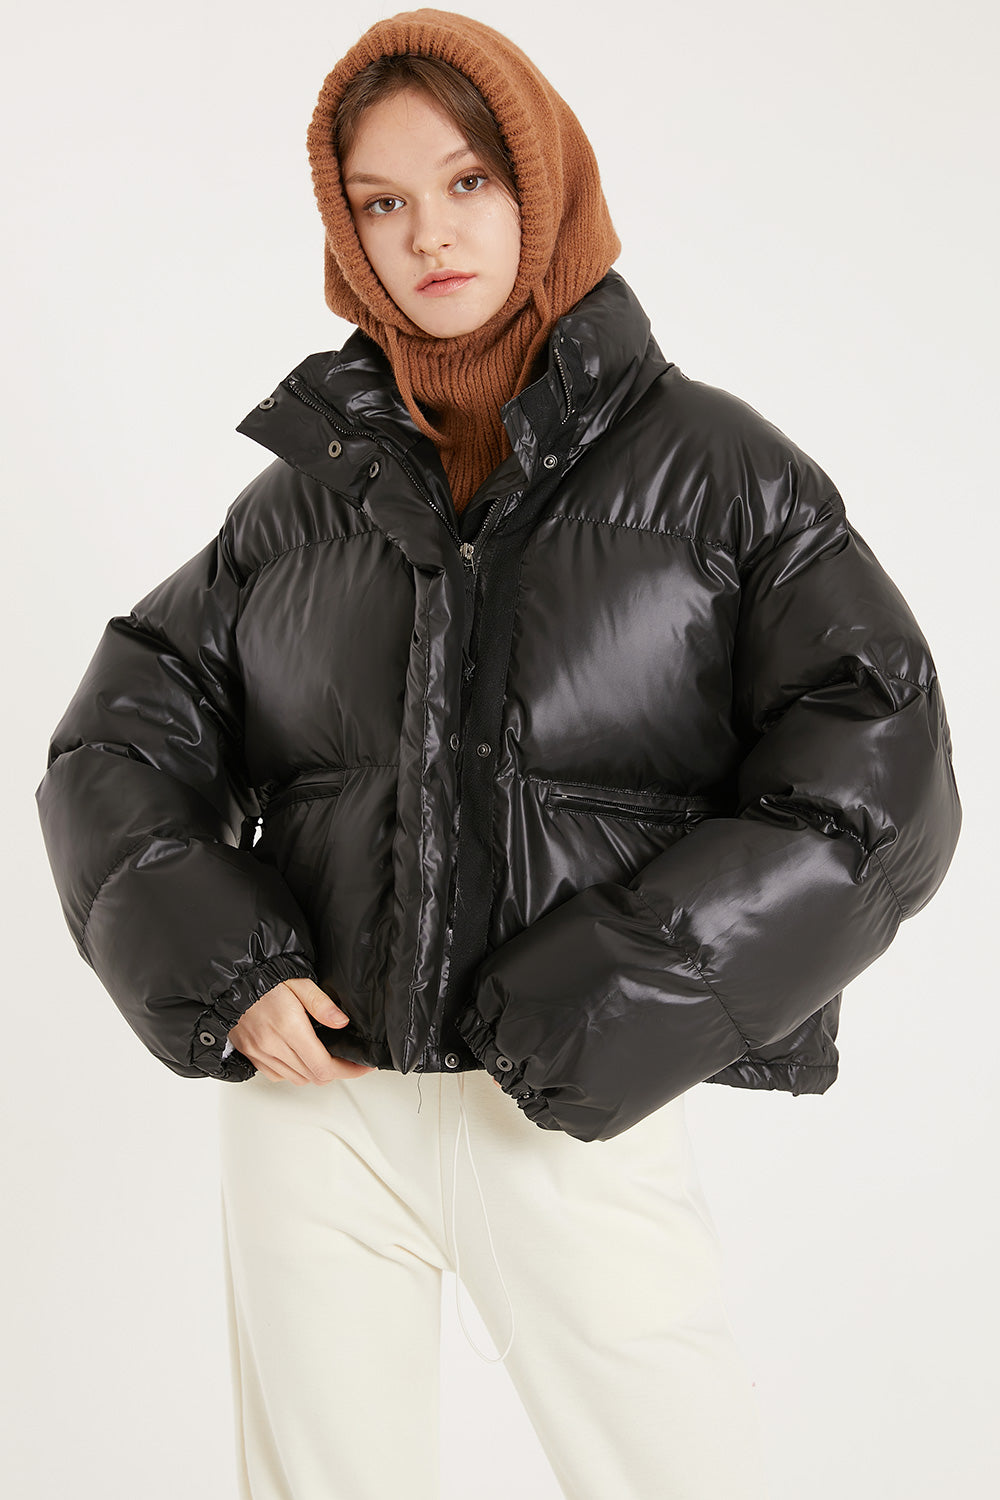 storets.com Harlow Faux Leather Puffer Jacket